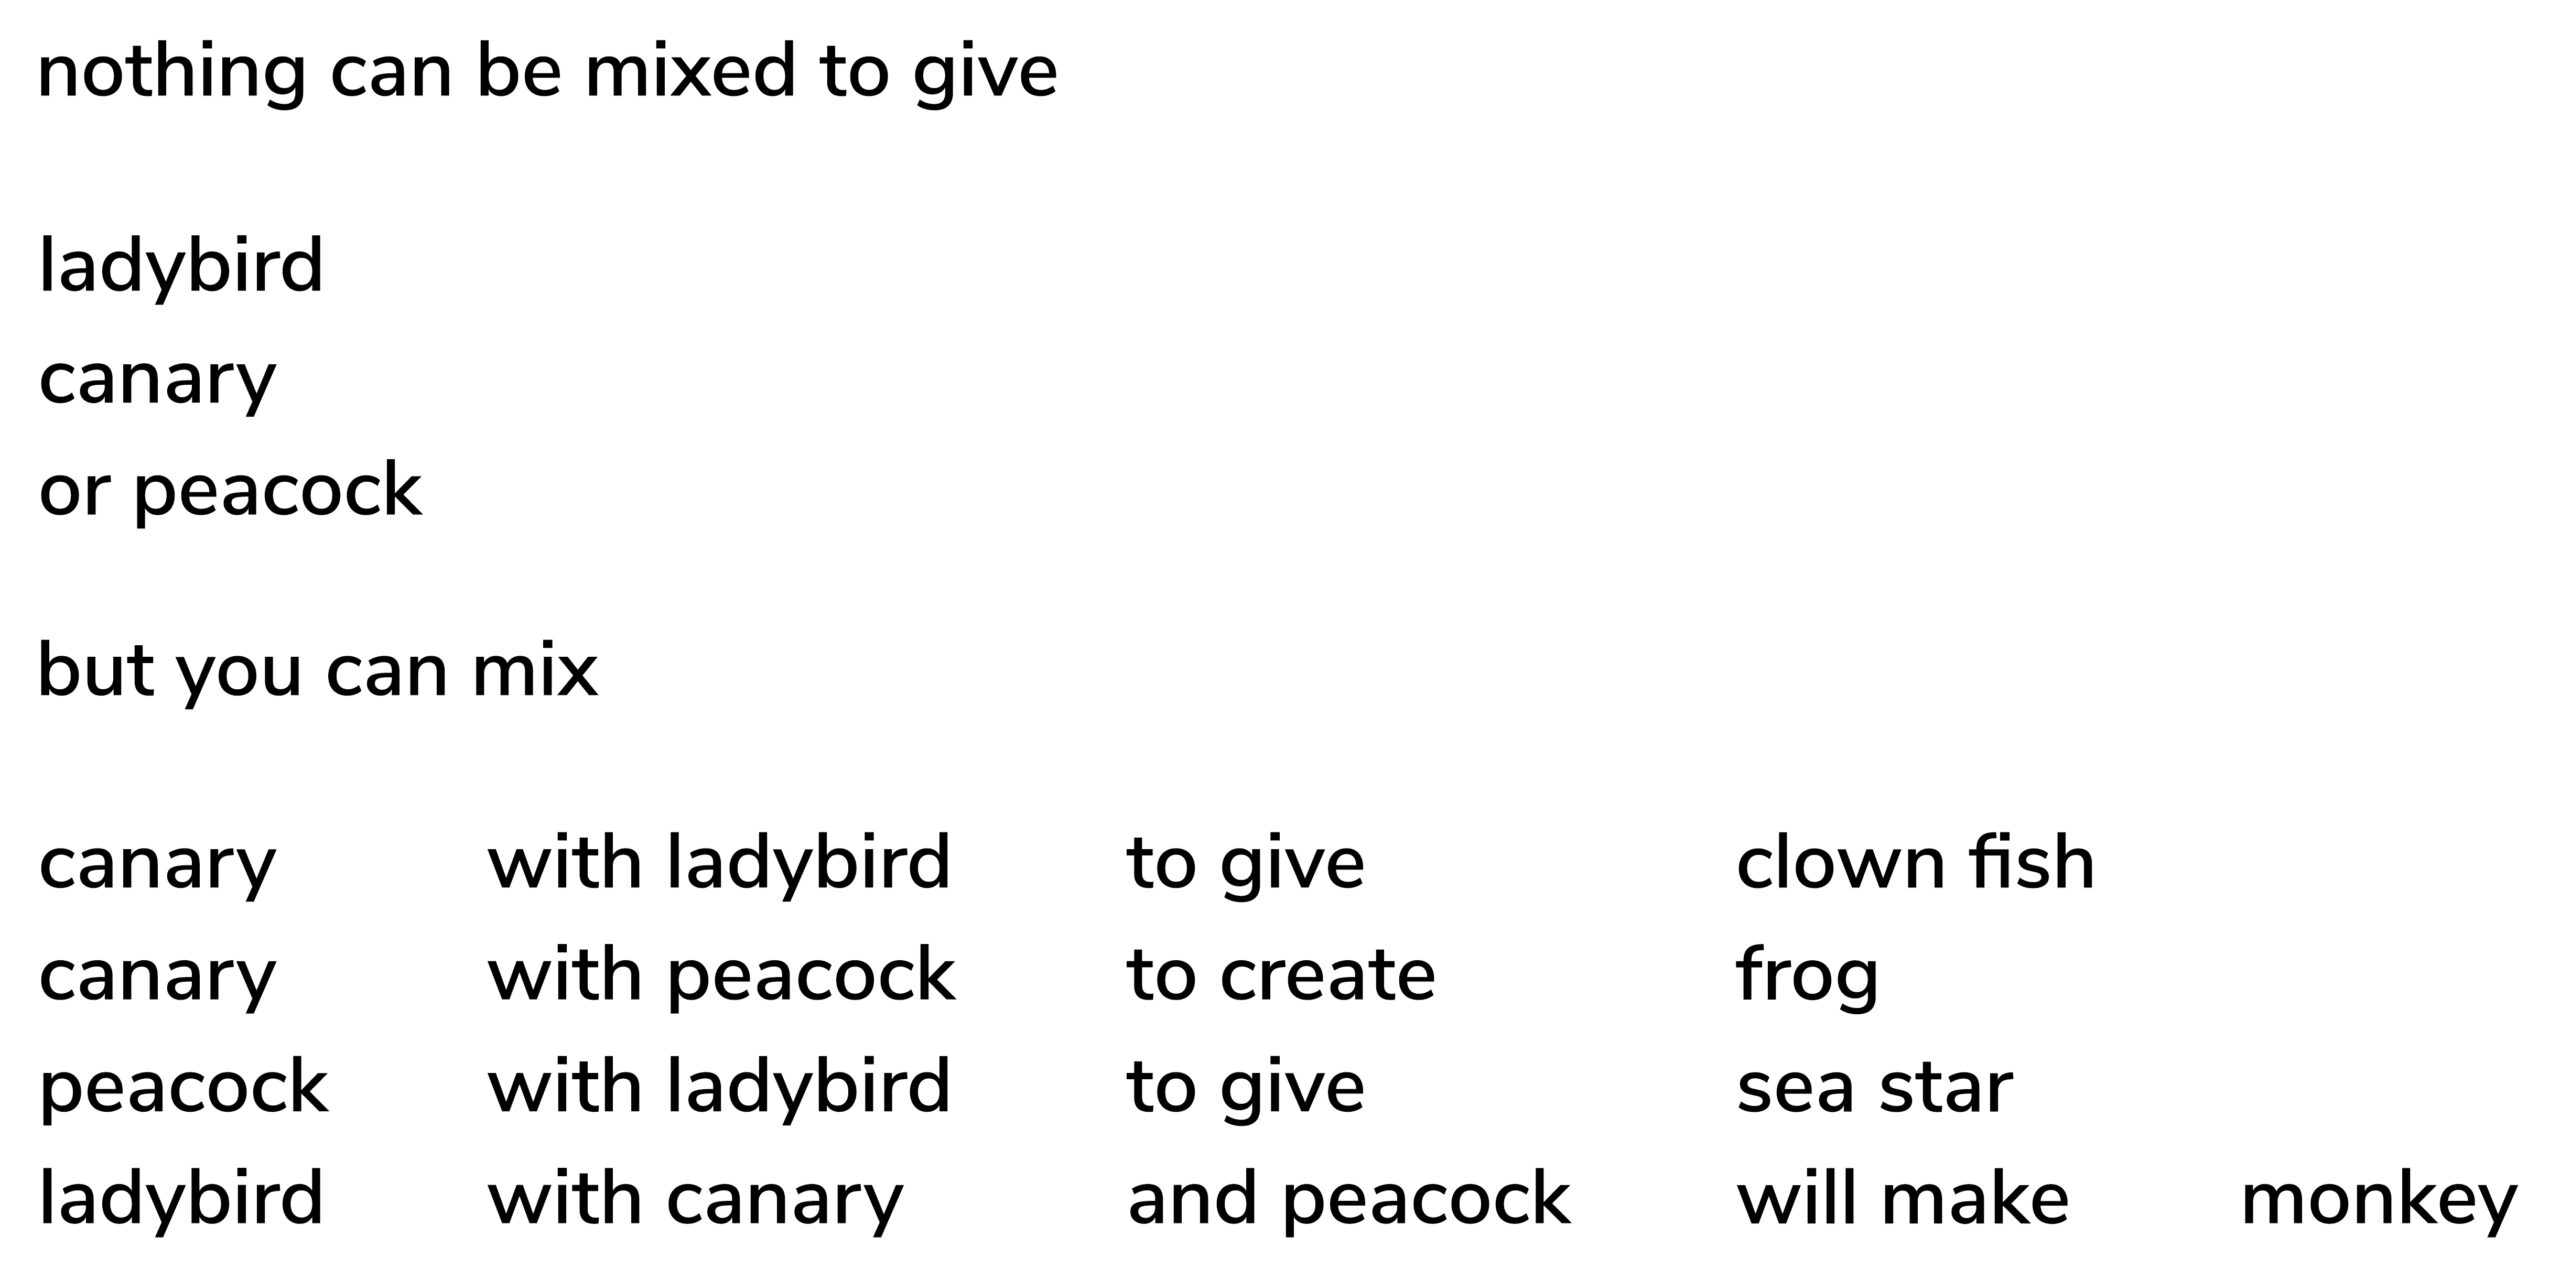 Poem text: nothing can be mixed to give / ladybird / canary / or peacock / but you can mix / canary with ladybird to give clown fish / canary with peacock to create frog / peacock with ladybird to give sea star / ladybird with canary and peacock will make monkey